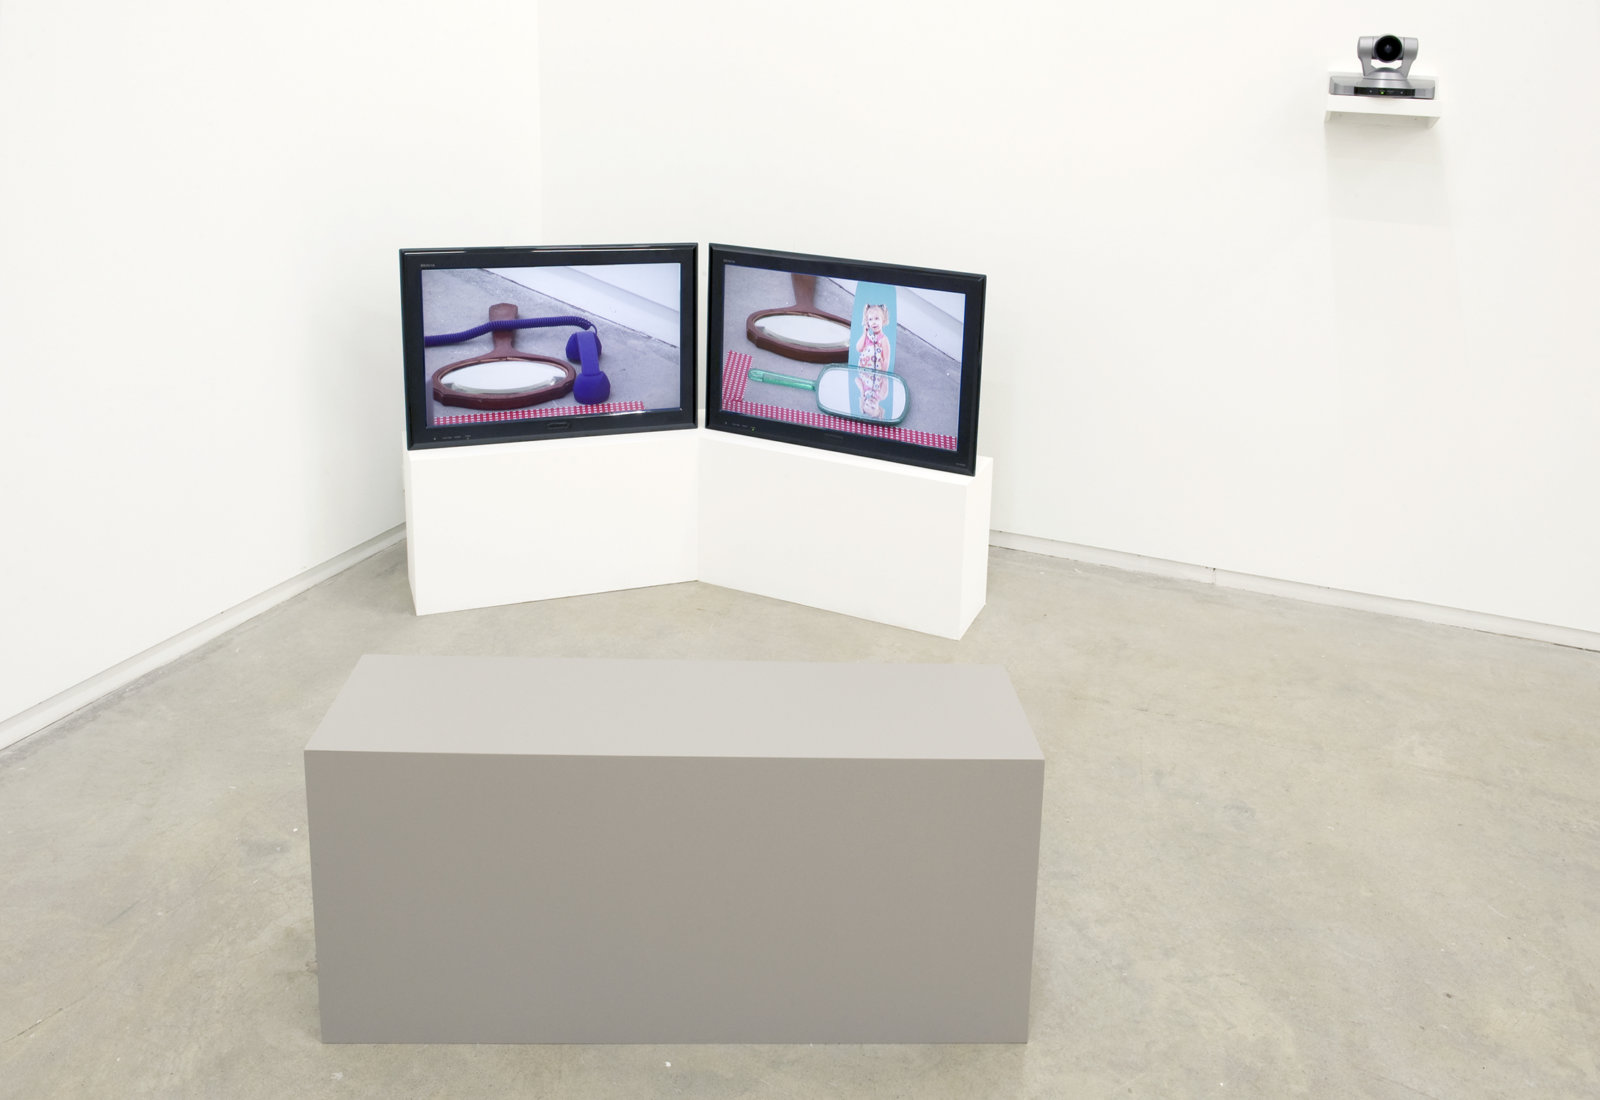 Judy Radul, Clients and Workers, 2011, live and pre-recorded video, objects, tape, painted copper and aluminum, dimensions variable